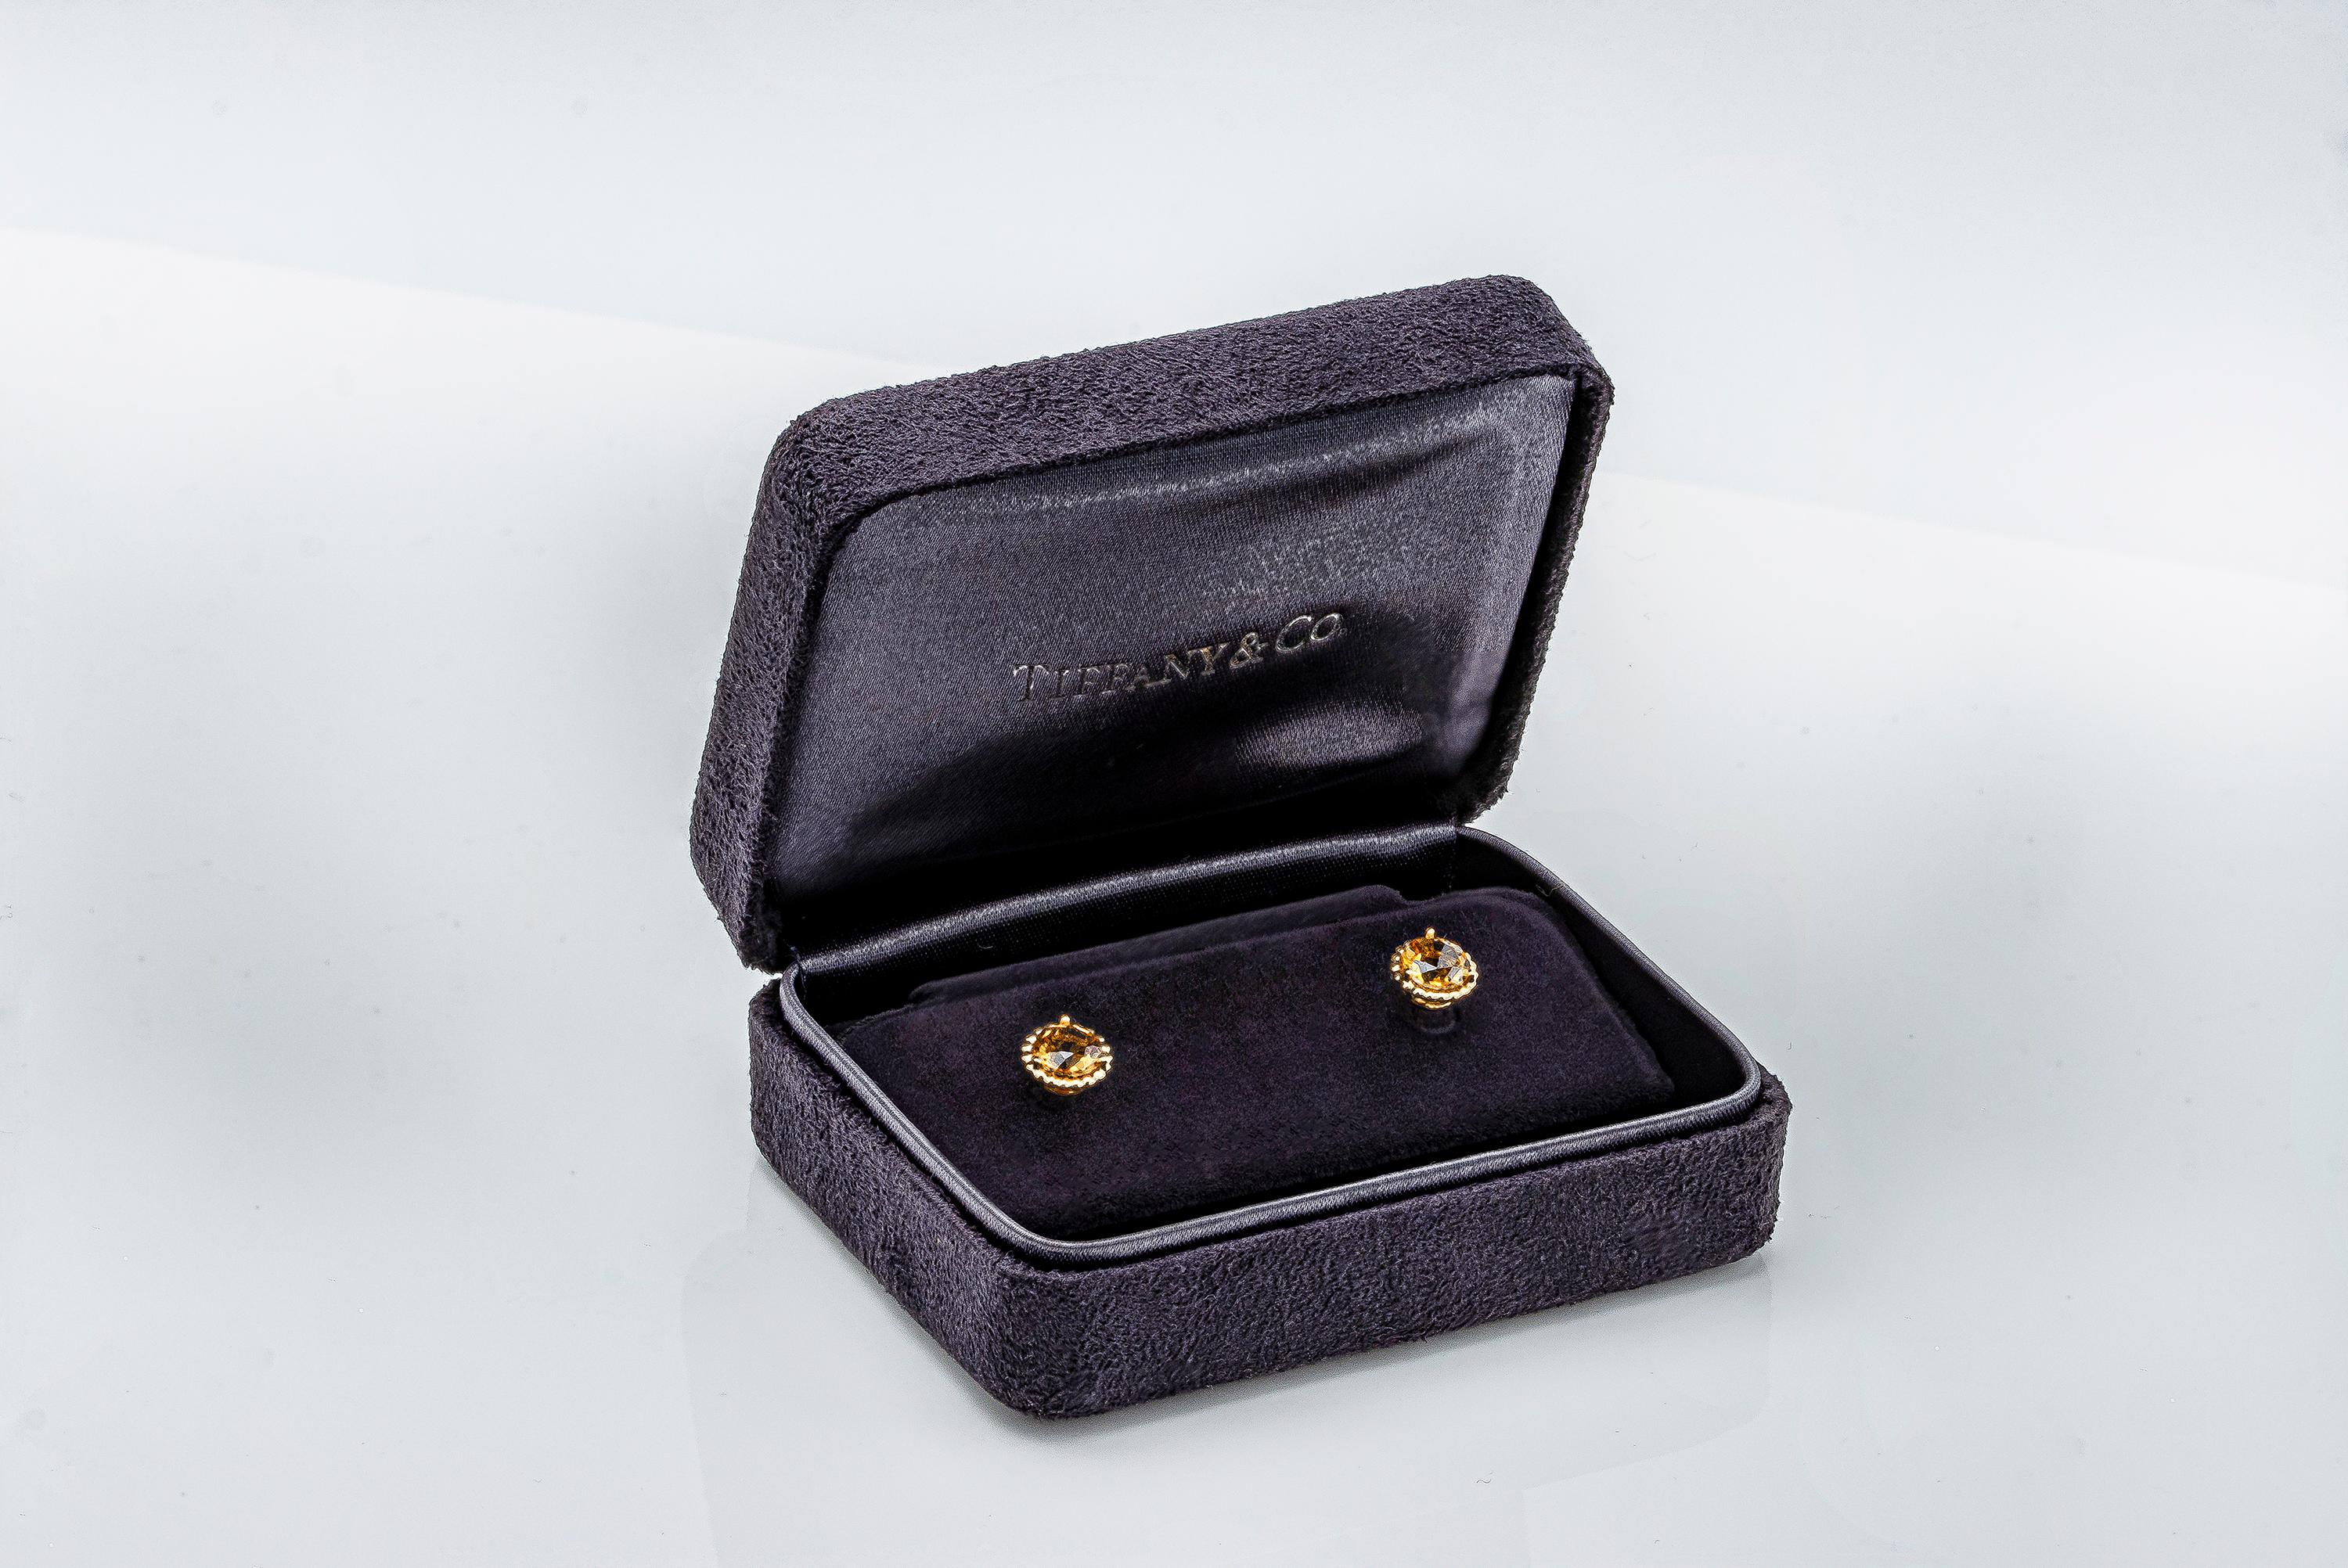 A discontinued model made and signed by Tiffany and Co. Each earring features a vibrant round orange citrine, set in a beaded style basket made in yellow gold. Comes with original Tiffany & Co. box. 